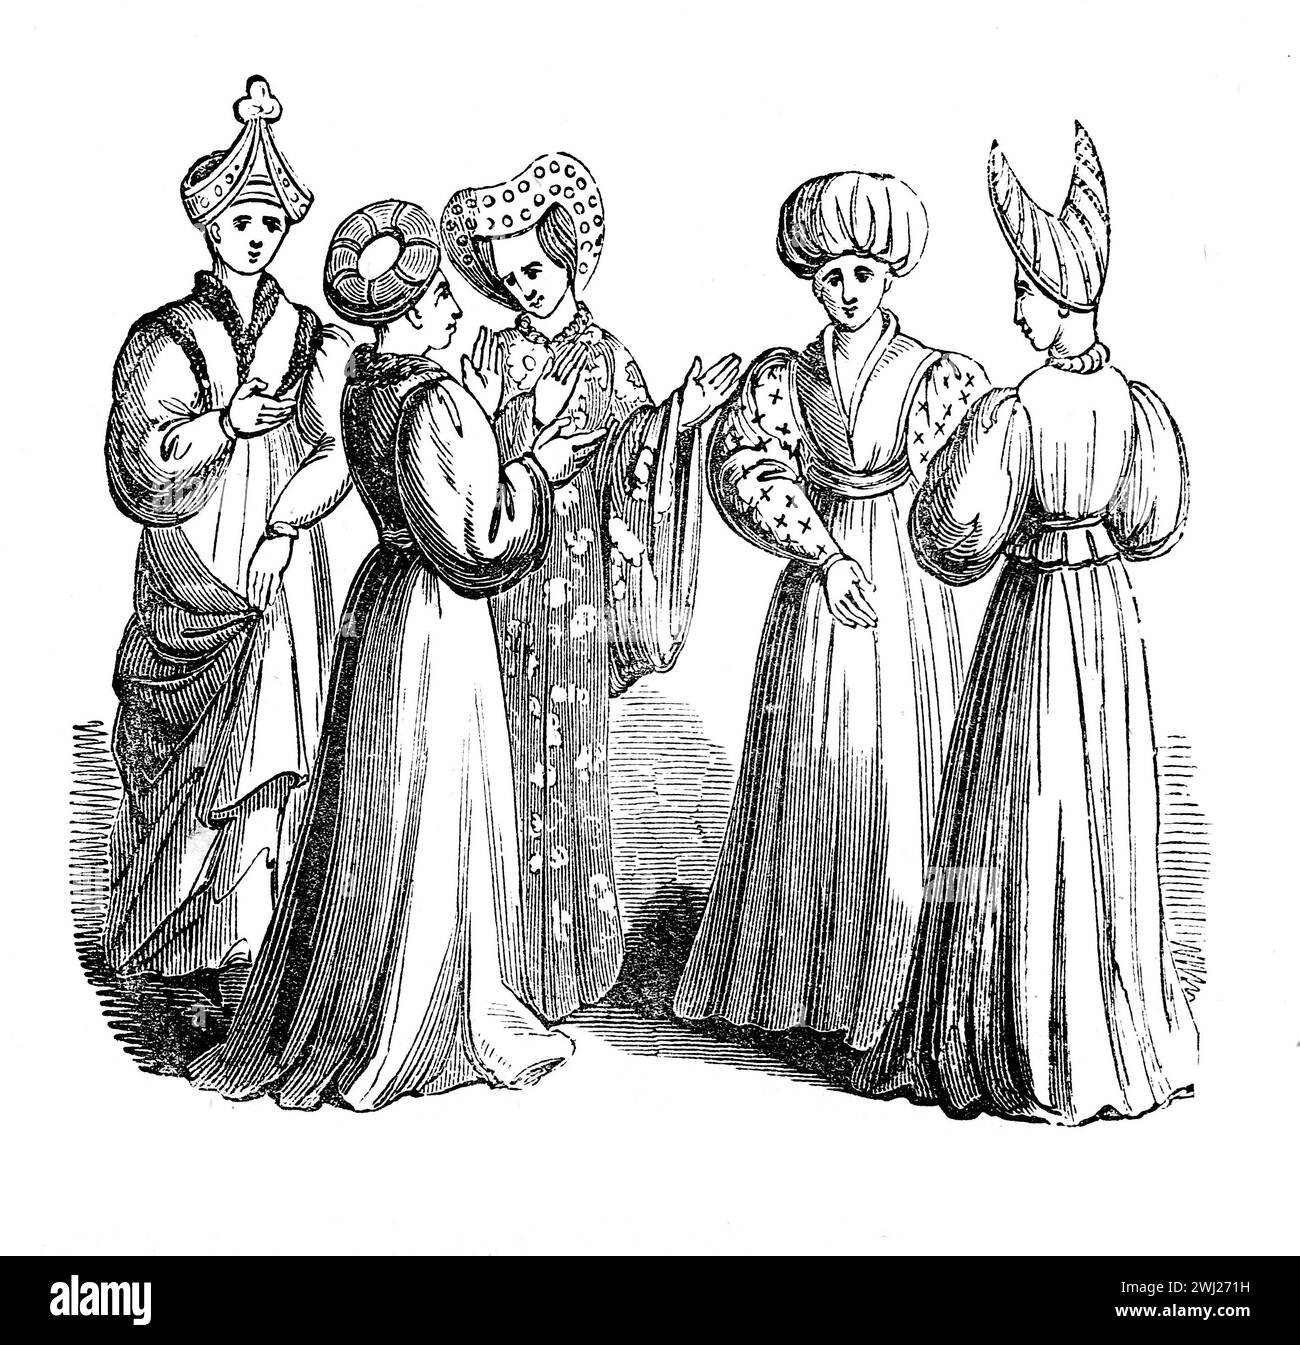 Female costumes in the time of Henry VI of England. Black and White Illustration from the 'Old England' published by James Sangster in 1860. Stock Photo